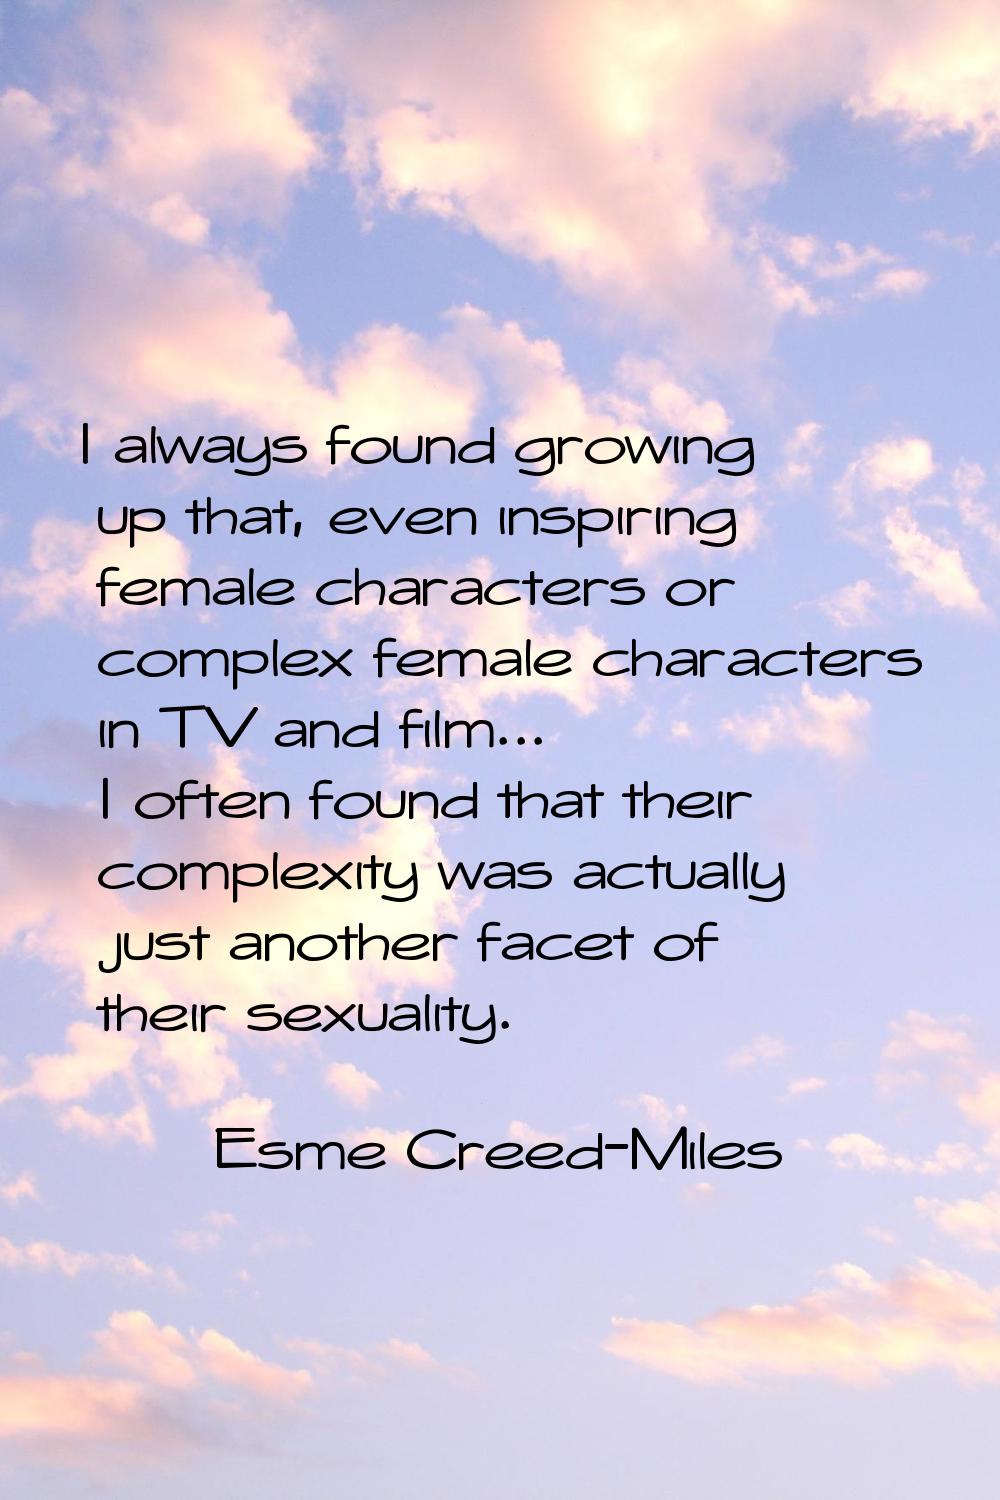 I always found growing up that, even inspiring female characters or complex female characters in TV